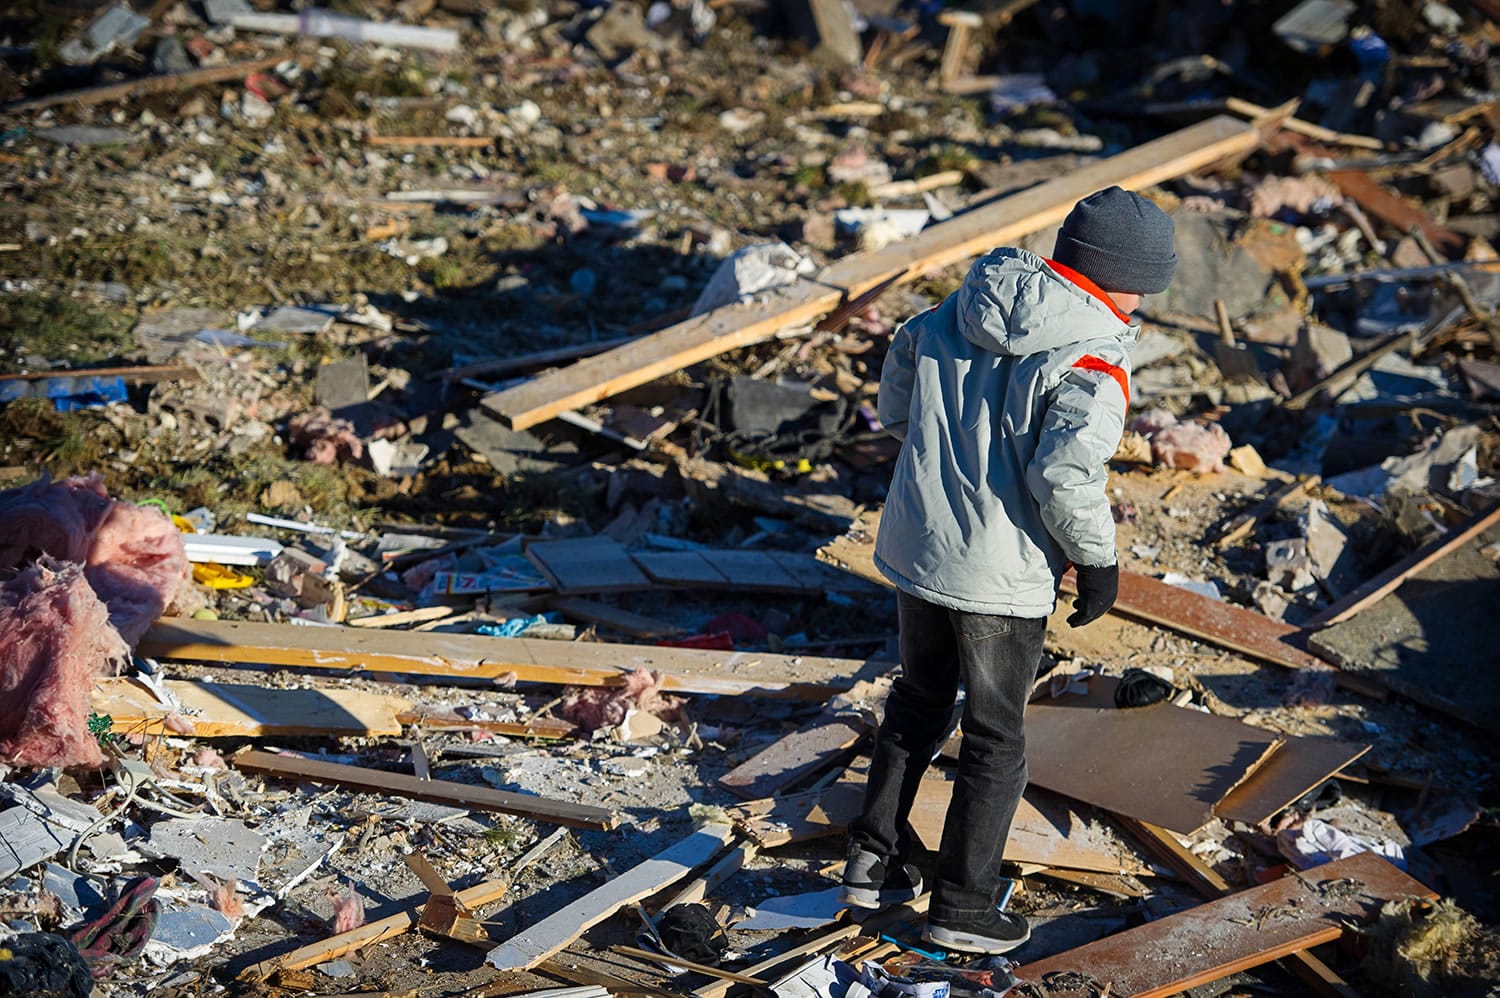 Brady Klein, 11, walks through the rubble of his family's home in Washington, Ill., after it was leveled Nov. 17 by a tornado. Brady's mother, Annmarie Klein, is asking for the public's help in locating three cards swept away by the twister, each of which Klein's brother, Paul McLaughlin, personalized with a note before his 2005 death from colon cancer.